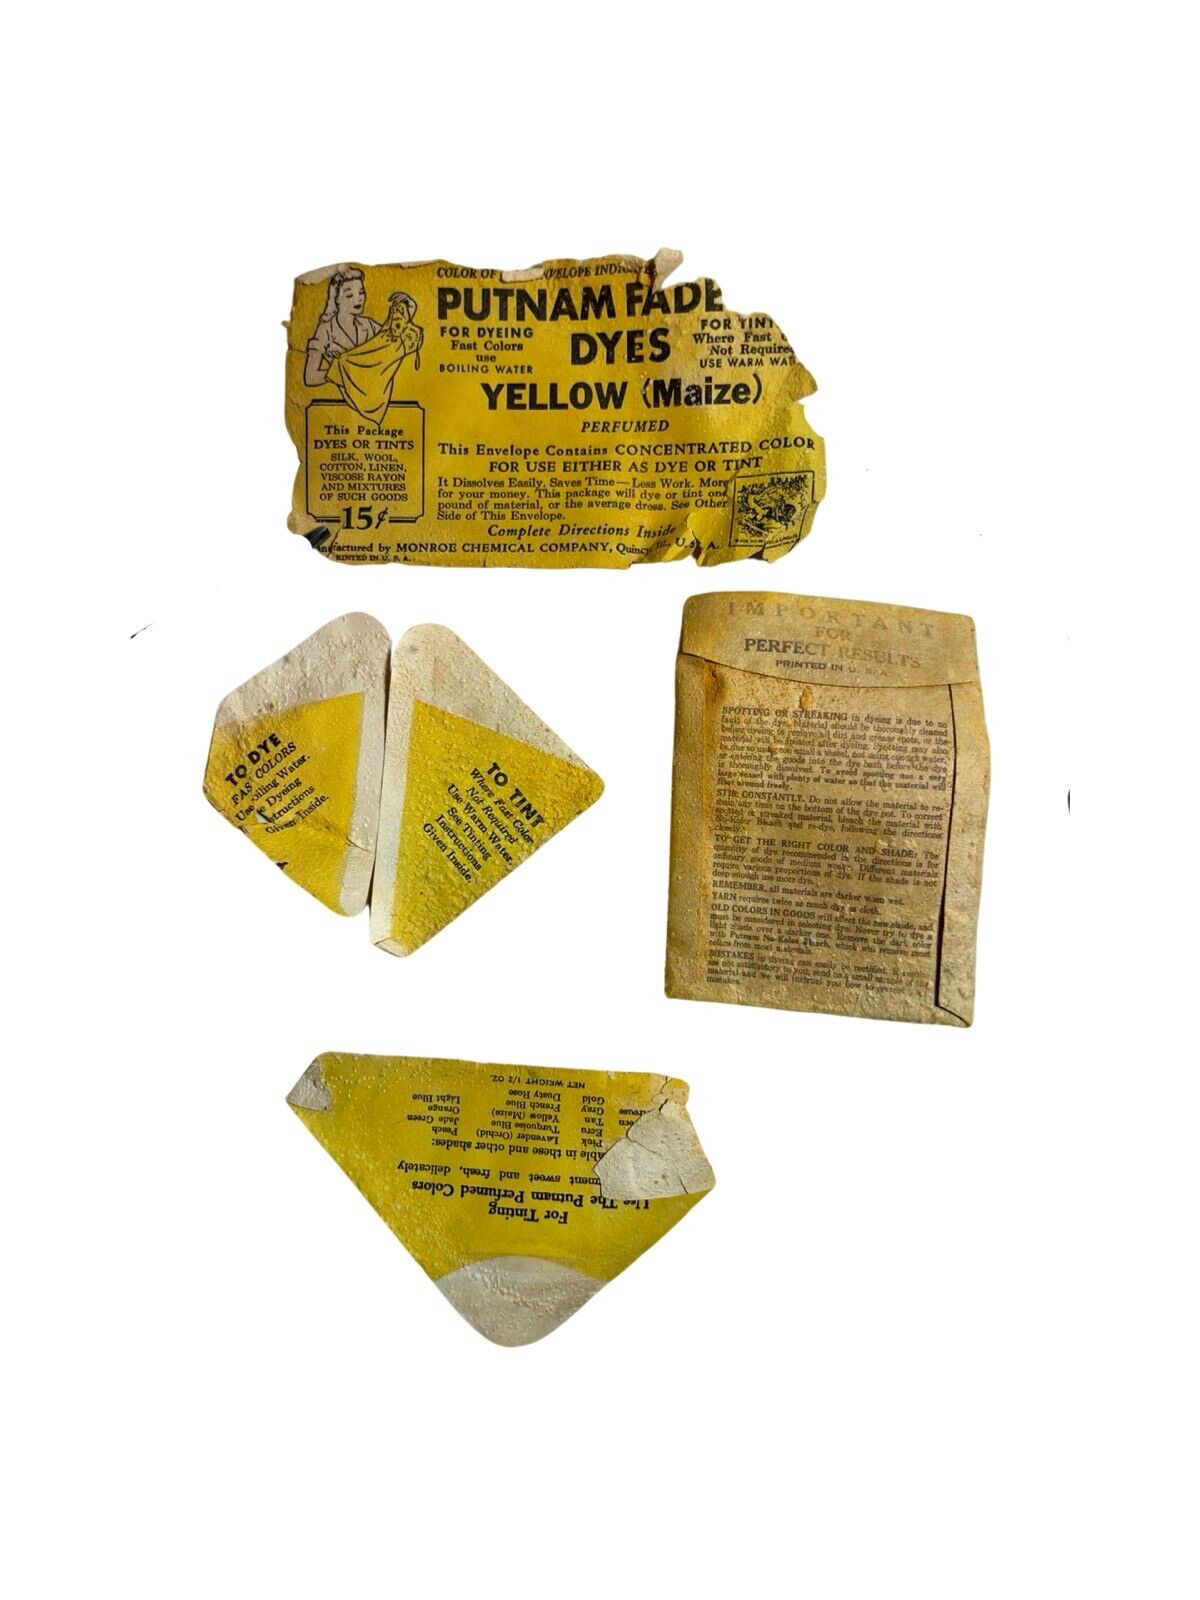 Vintage Advertising Putnam Fadeless Dye Yellow Original Package And Instructions